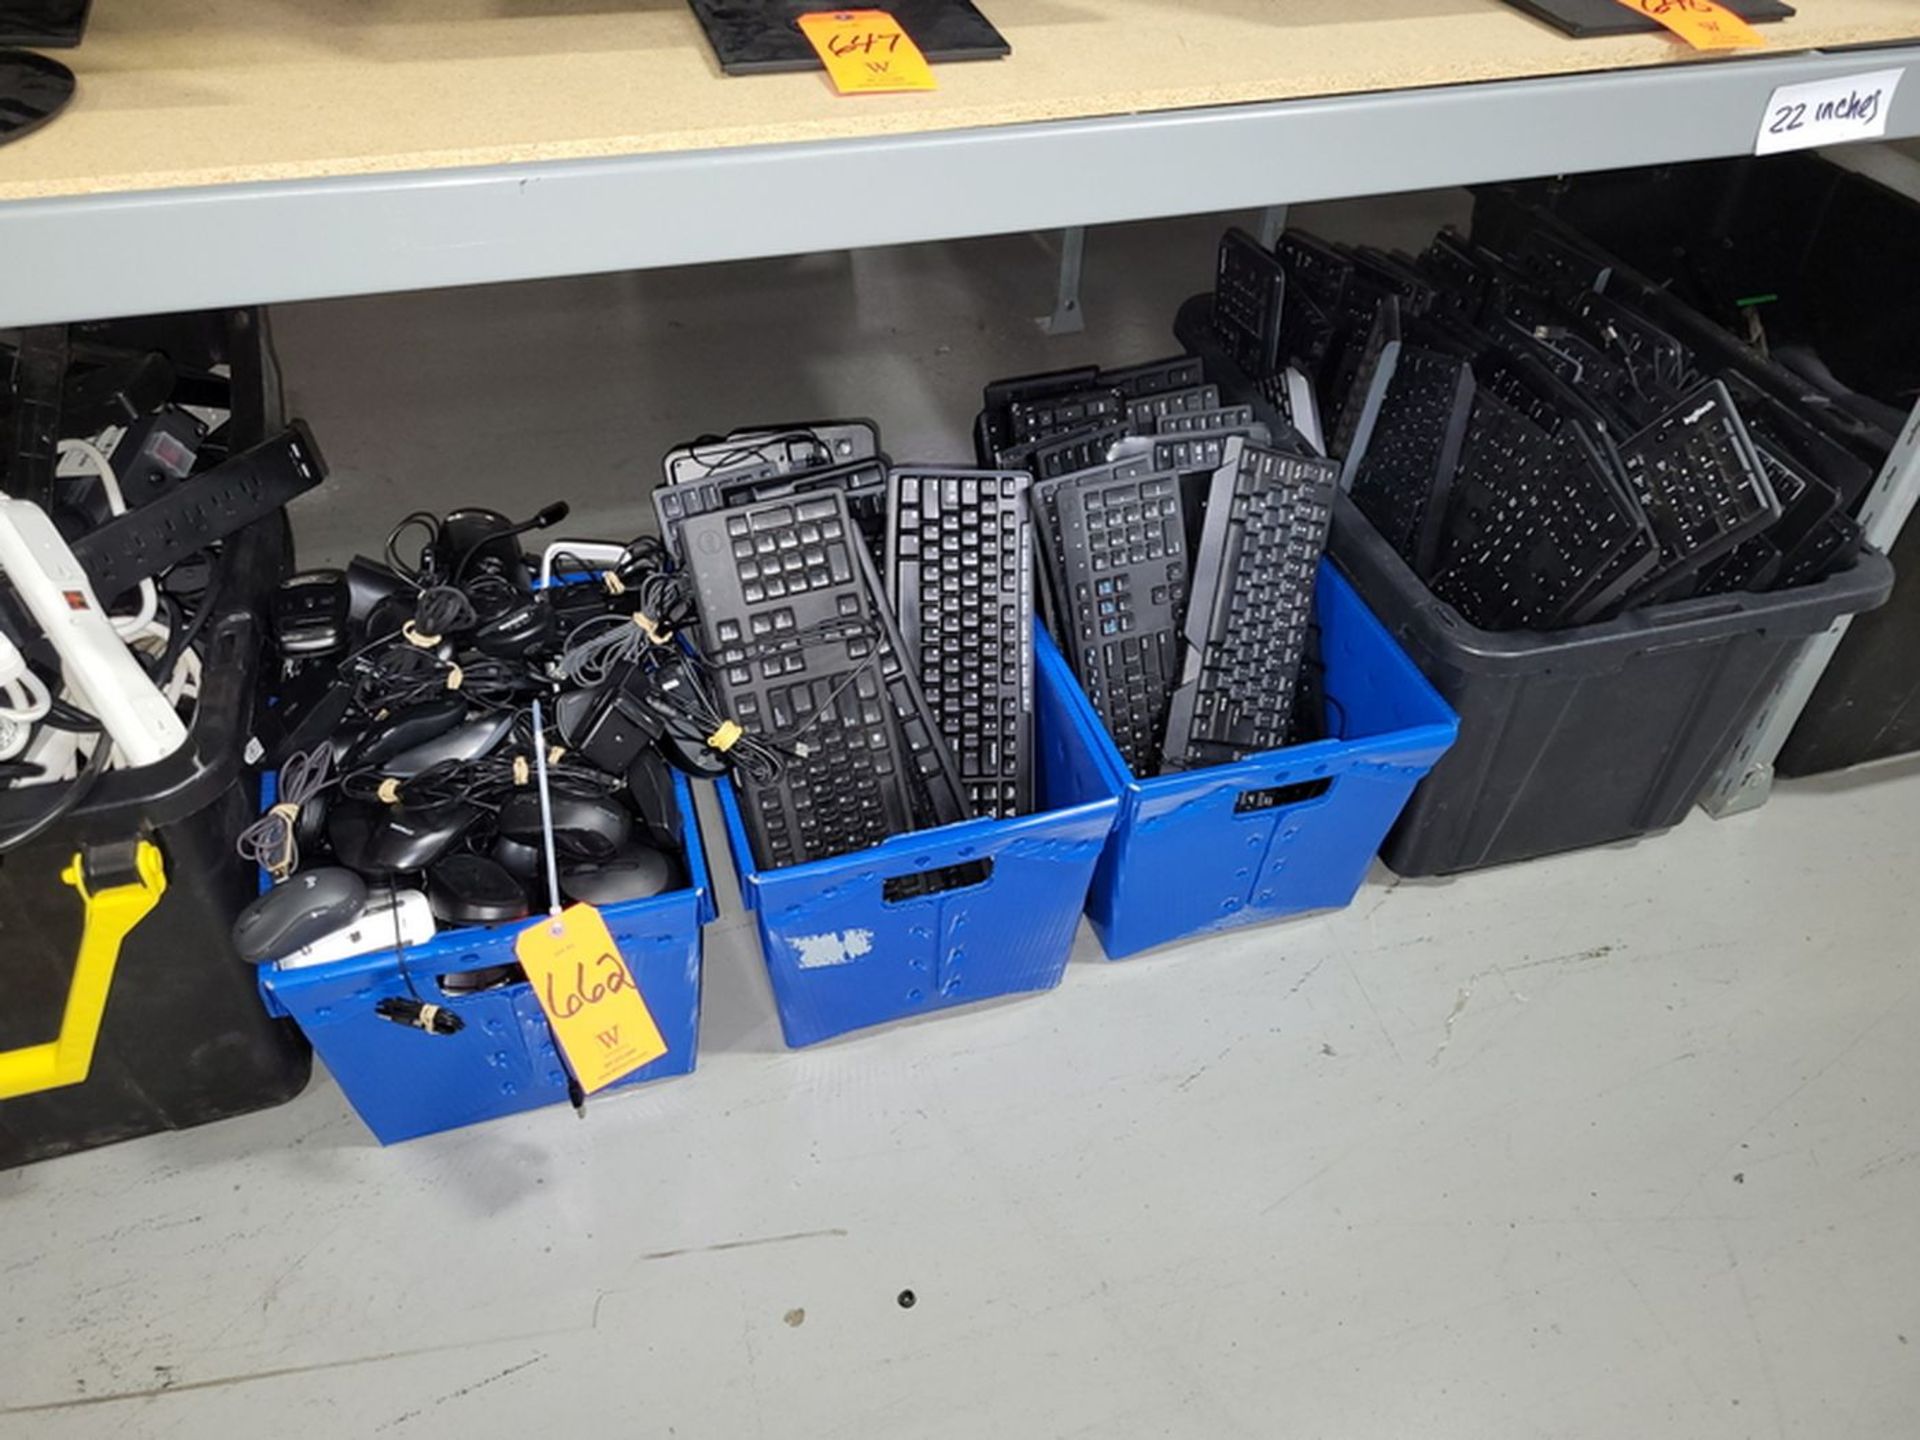 Lot - Assorted Power Strips, Computer Mice, Keyboards, in (6) Bins - Image 2 of 3